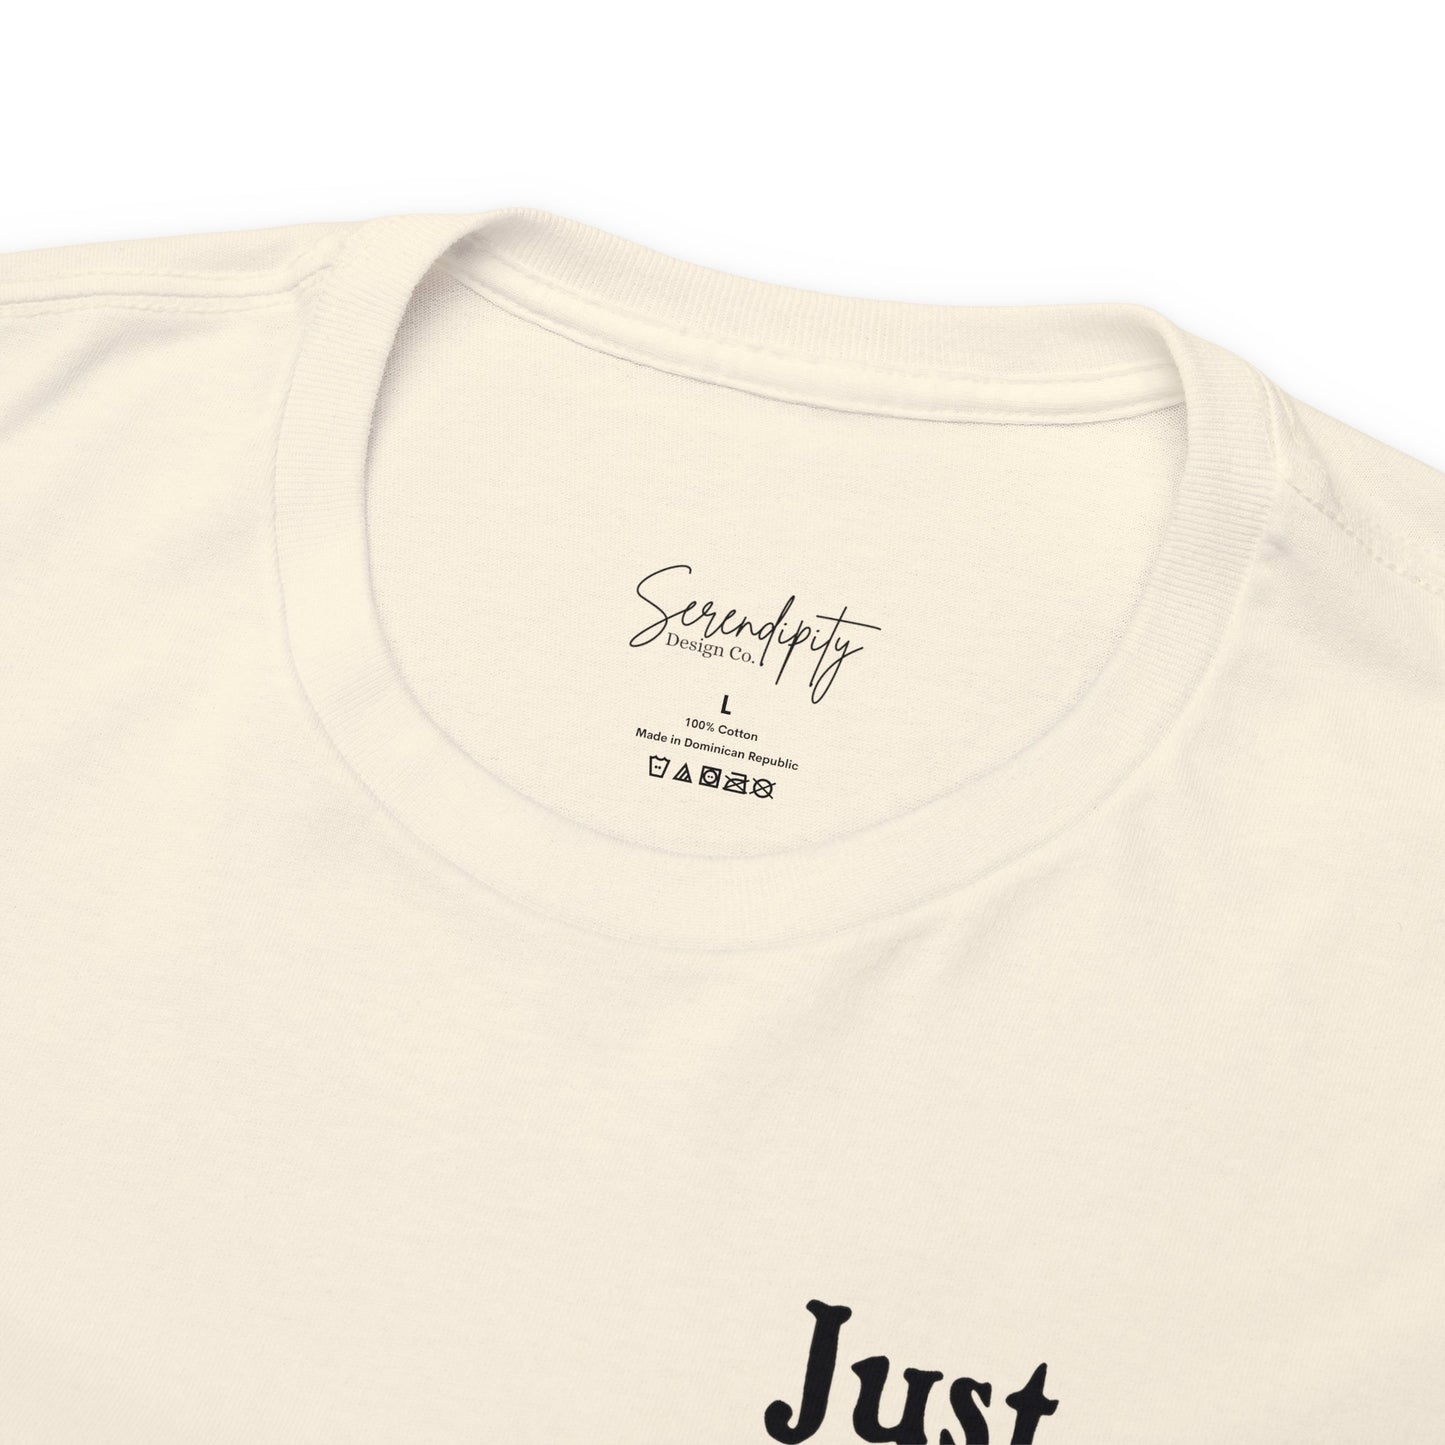 Just One More Chapter Unisex Tee